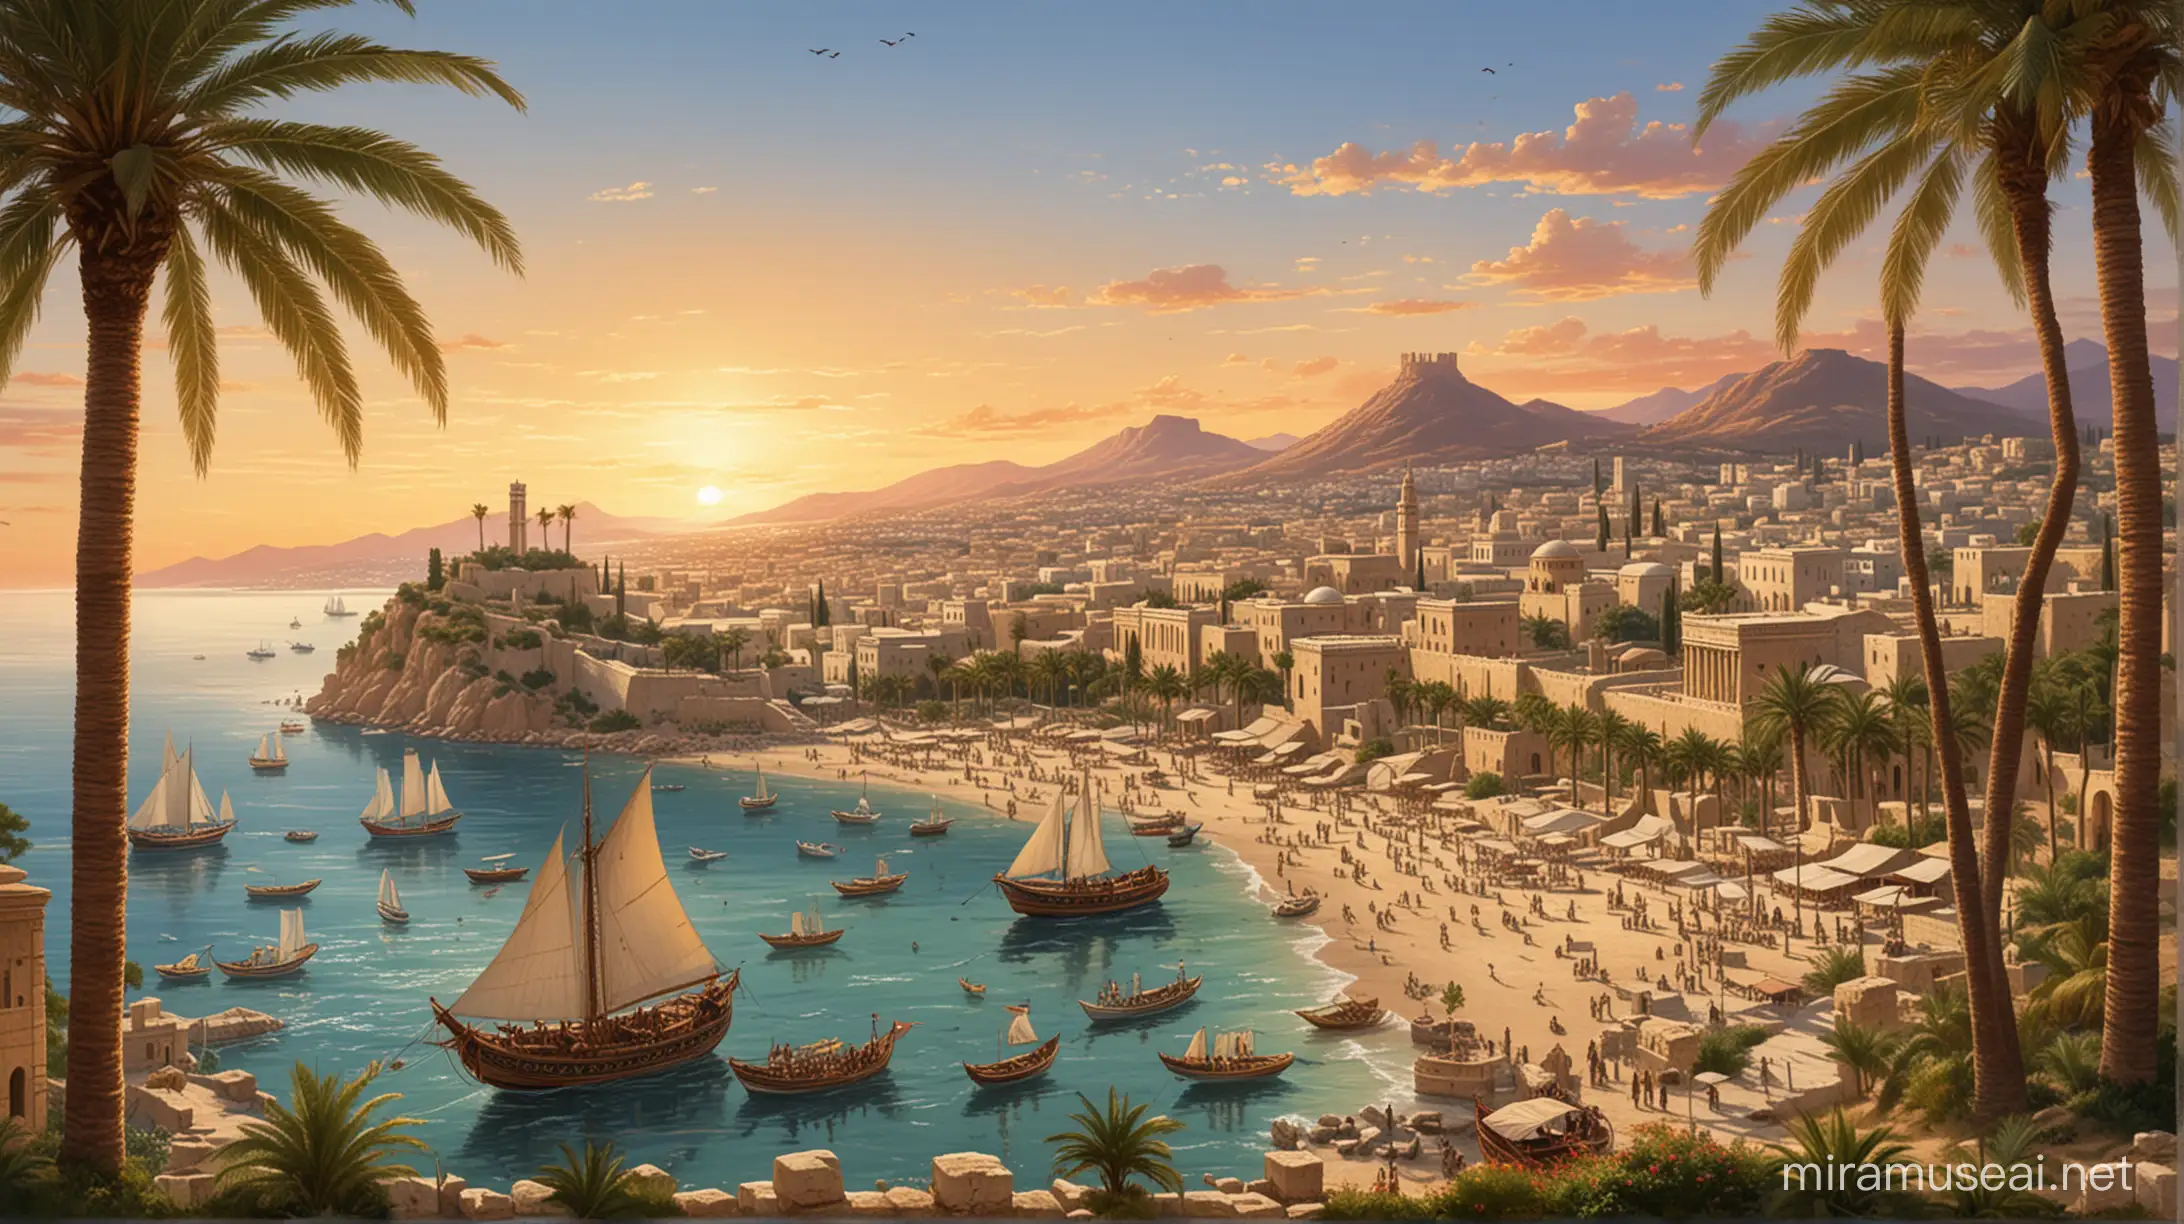 Ancient Carthage Glory Majestic Temples Bustling Ports and Exotic Sunset